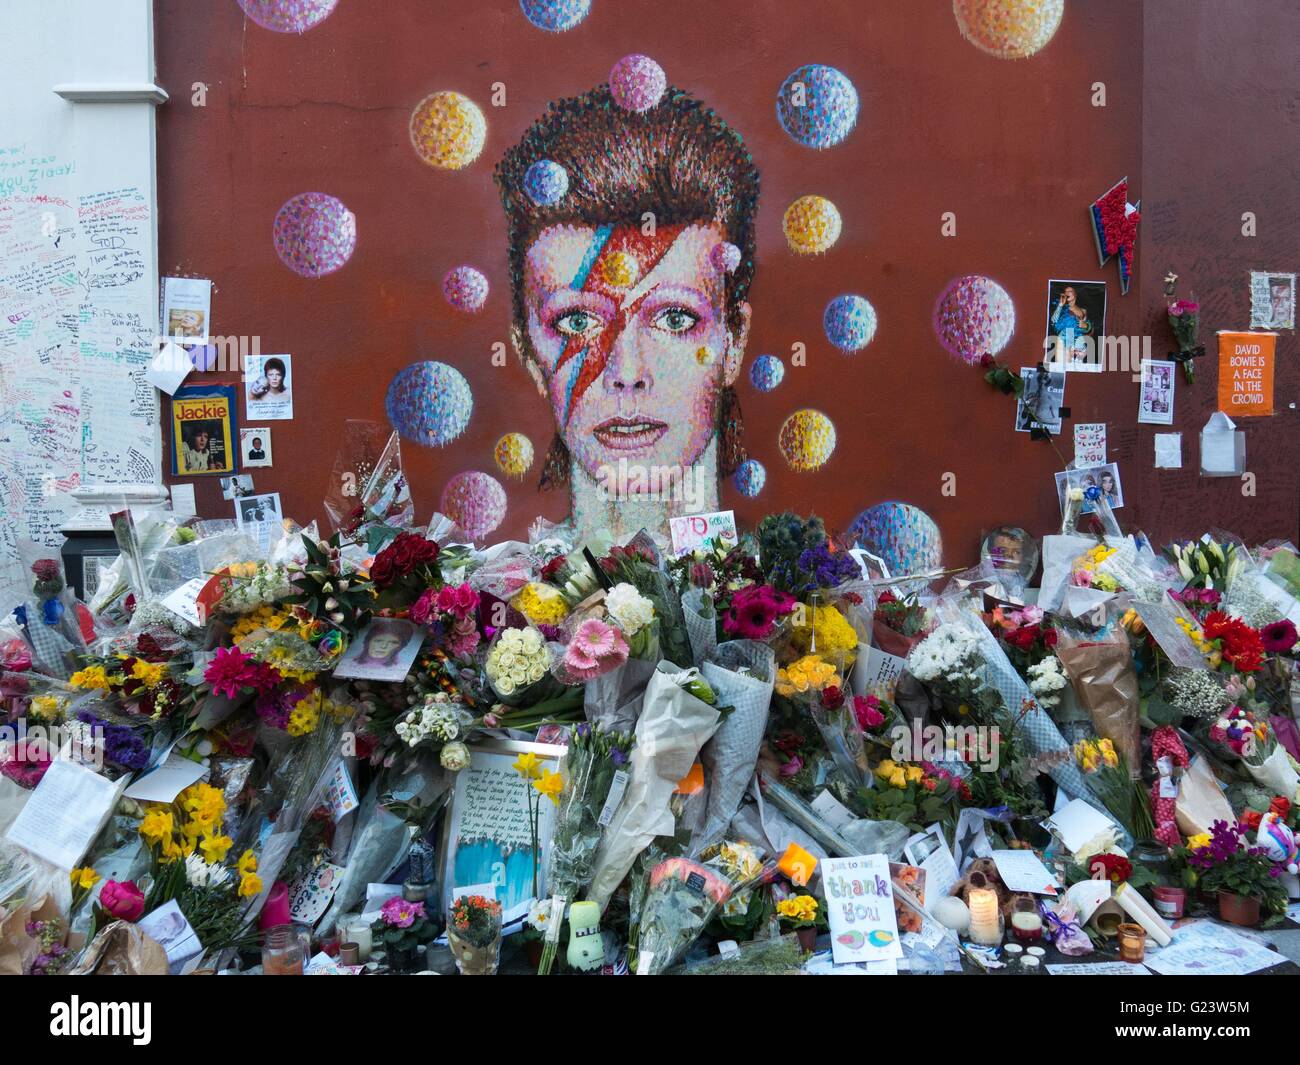 A mural of British singer David Bowie by artist Jimmy C in Brixton, south London. Stock Photo